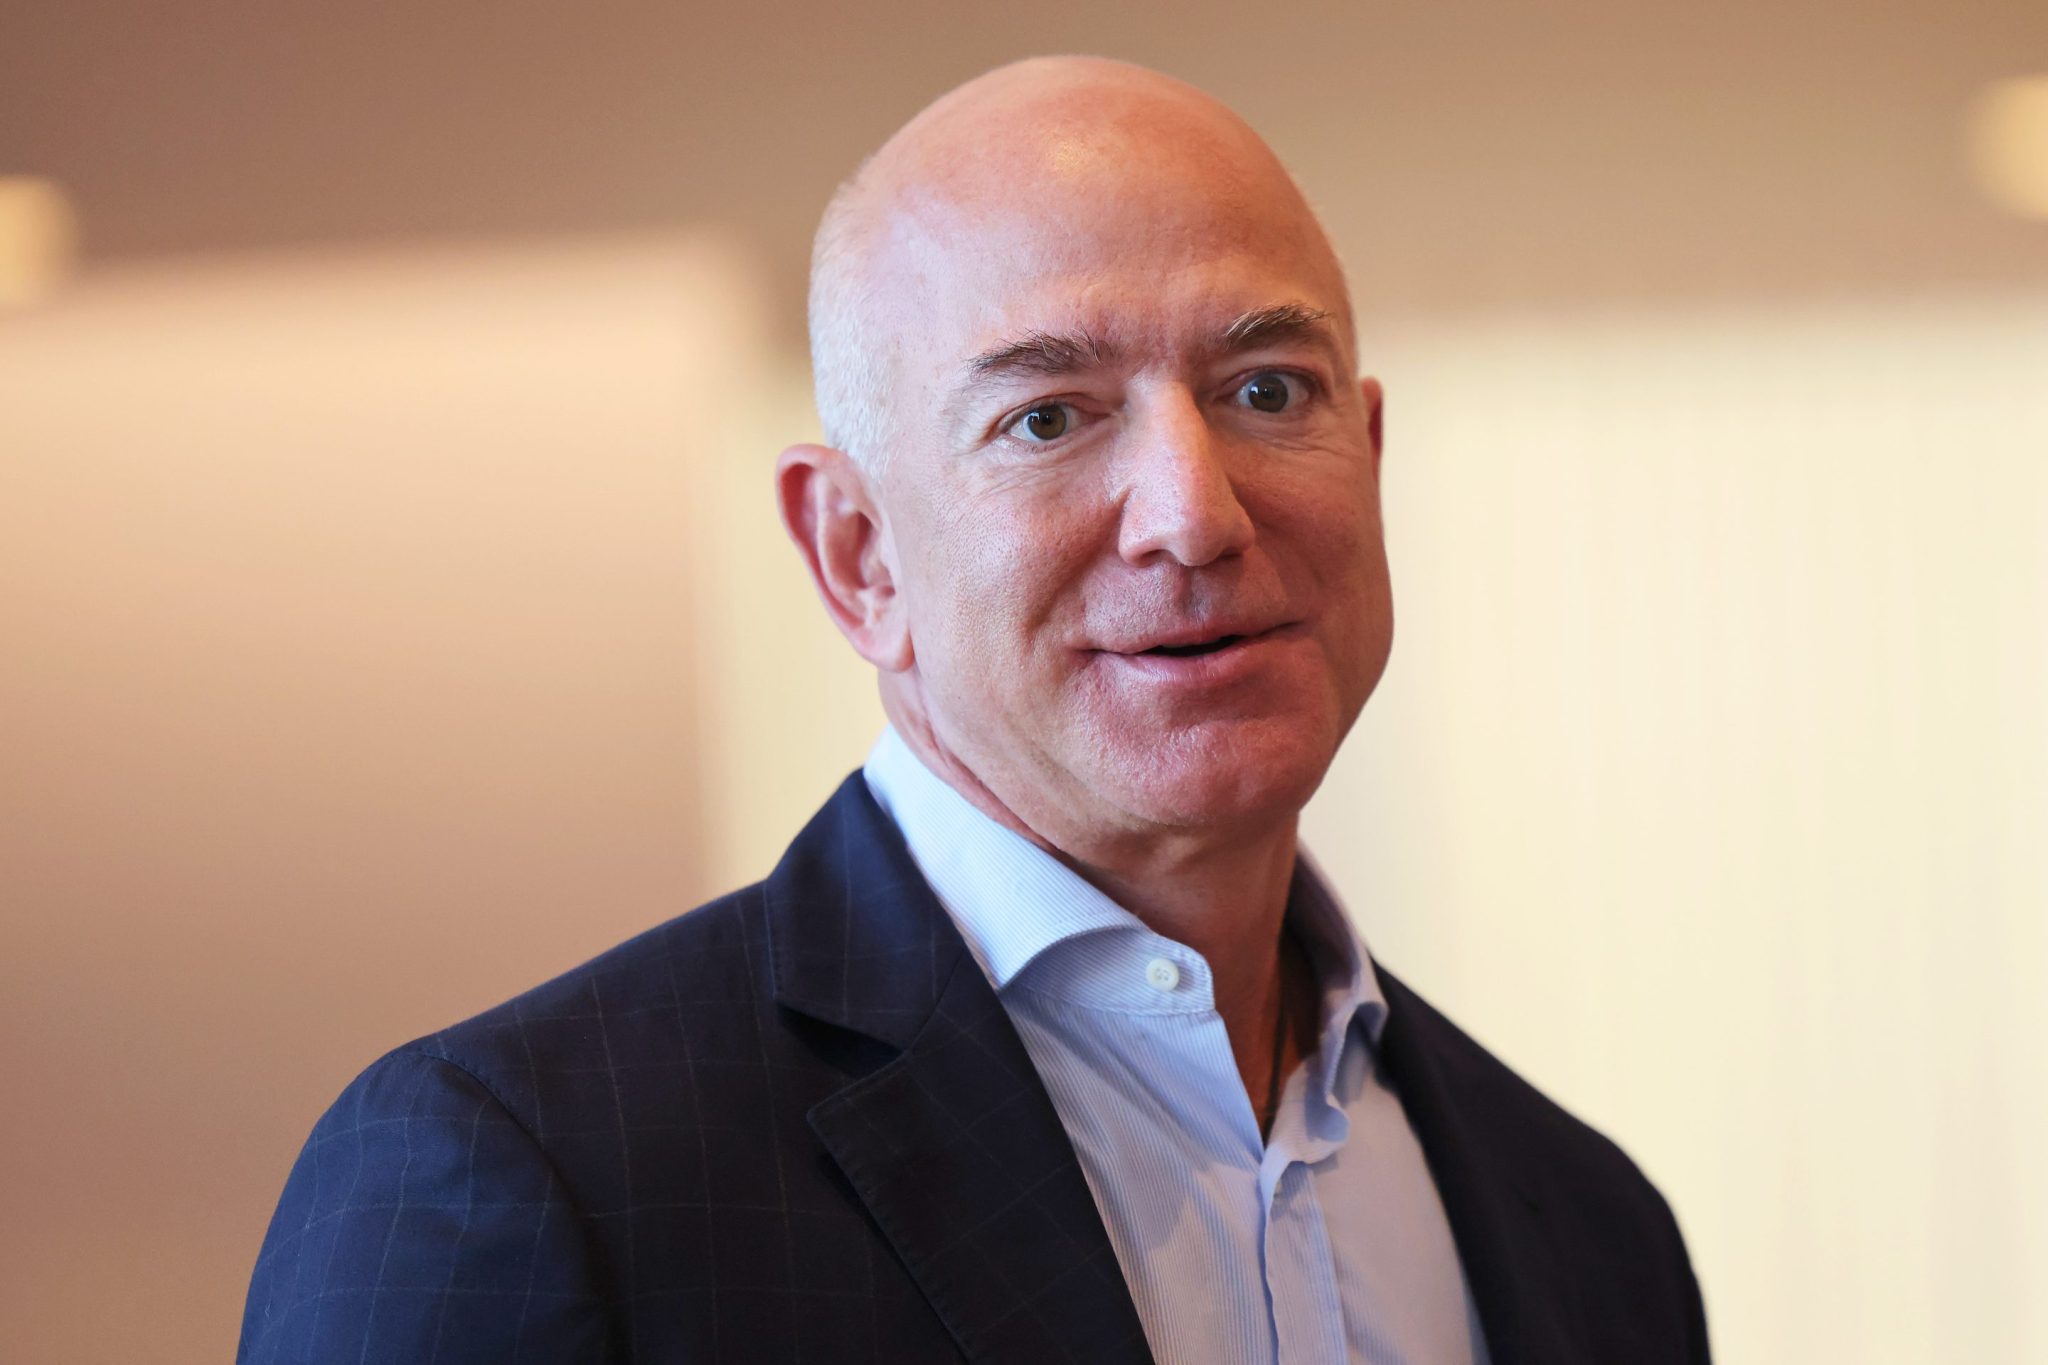 Jeff Bezos sparks tax debate with move to Florida